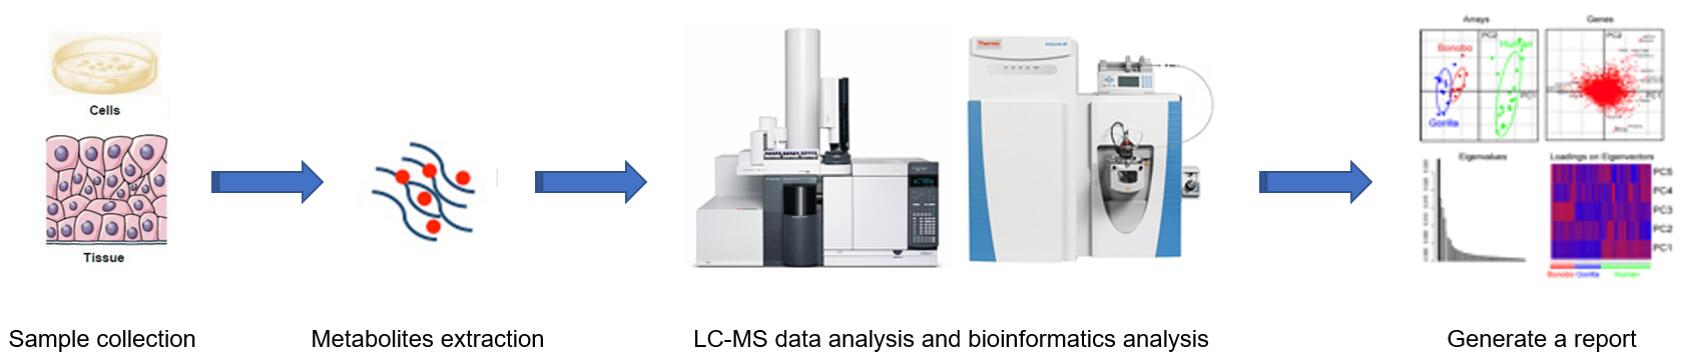 A typical workflow for MS-based Glycosphingolipid analysis service in different complex biological samples.